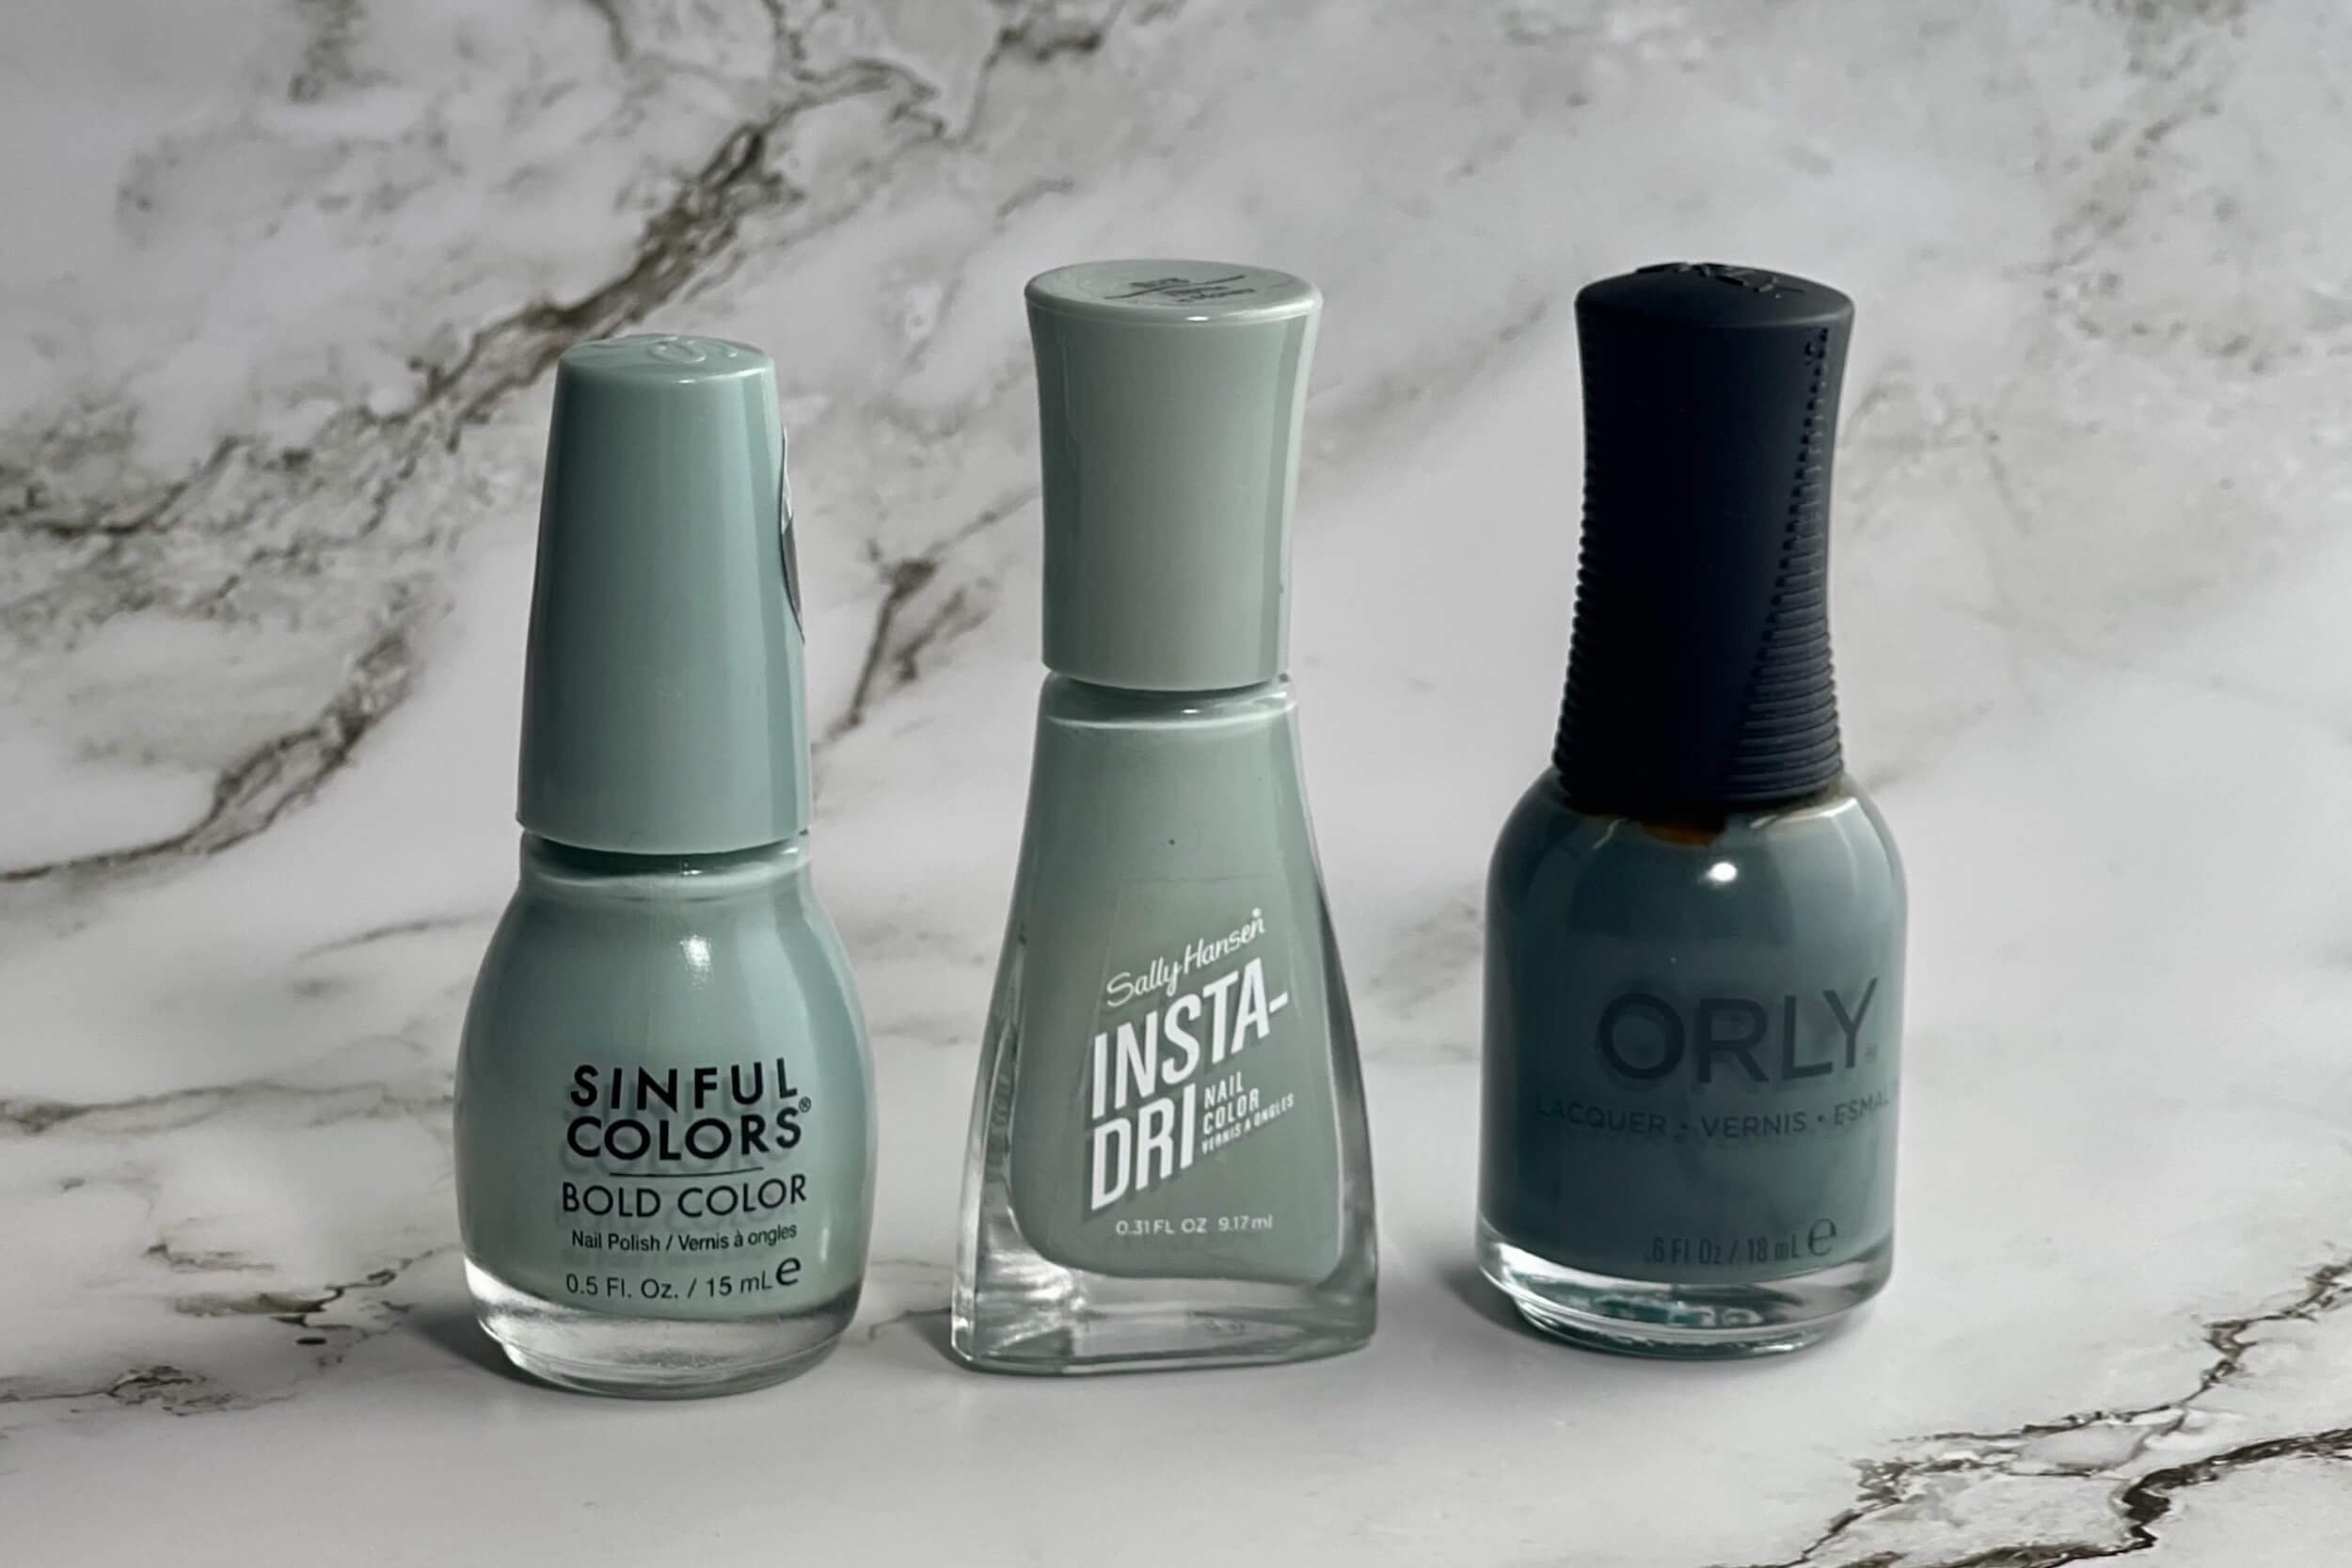 4. "The Best Sage Green Nail Polish Brands" - wide 10